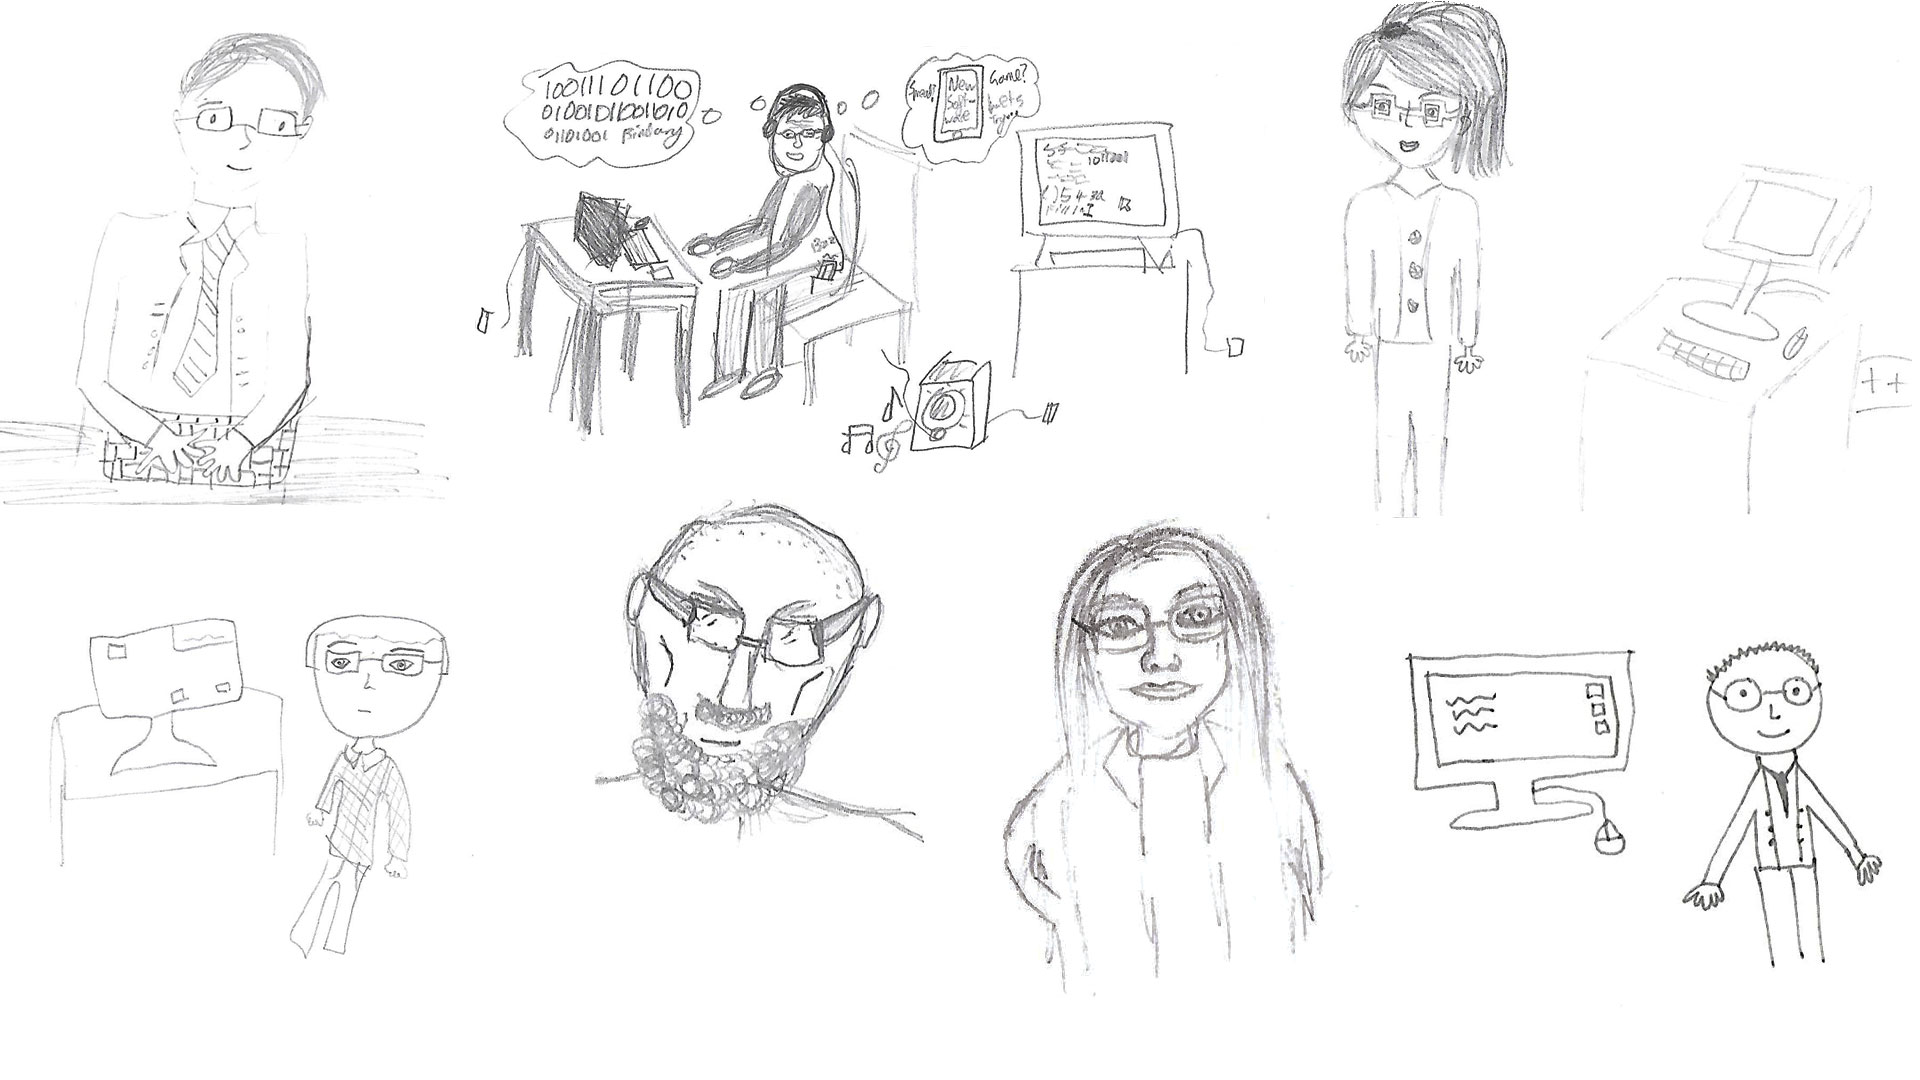 Yr8 student drawings of computer scientists